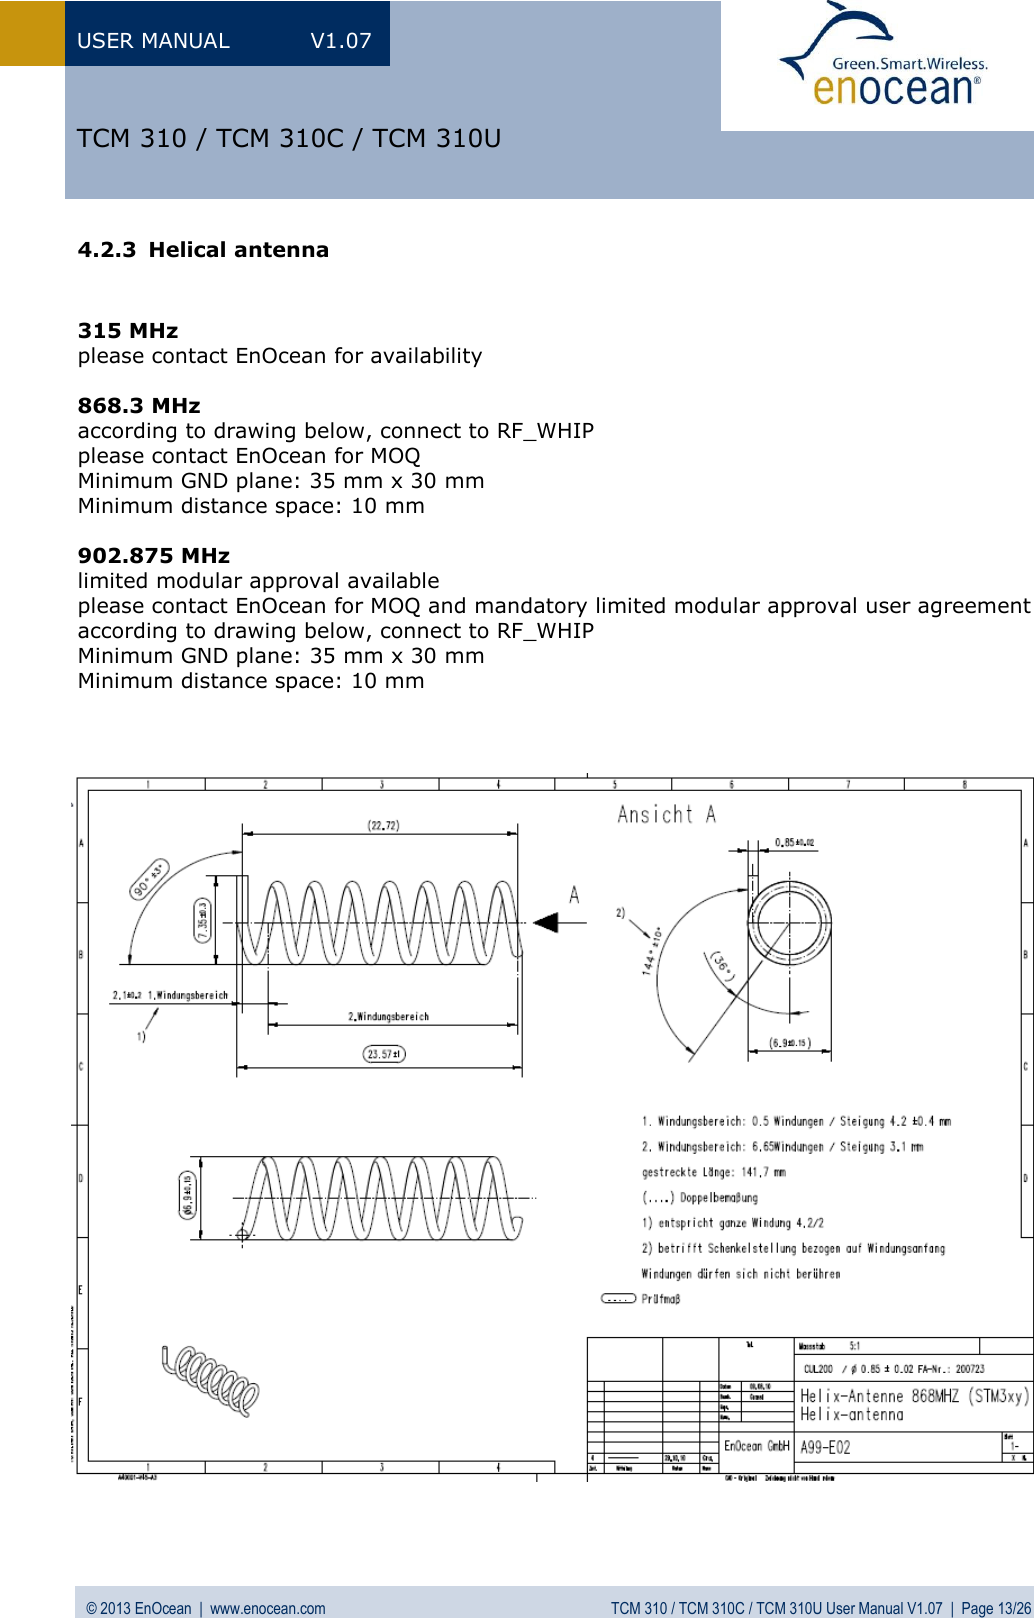 USER MANUAL  V1.07 © 2013 EnOcean  |  www.enocean.com  TCM 310 / TCM 310C / TCM 310U User Manual V1.07  |  Page 13/26   TCM 310 / TCM 310C / TCM 310U 4.2.3 Helical antenna   315 MHz please contact EnOcean for availability   868.3 MHz according to drawing below, connect to RF_WHIP  please contact EnOcean for MOQ Minimum GND plane: 35 mm x 30 mm Minimum distance space: 10 mm  902.875 MHz limited modular approval available please contact EnOcean for MOQ and mandatory limited modular approval user agreement according to drawing below, connect to RF_WHIP Minimum GND plane: 35 mm x 30 mm Minimum distance space: 10 mm                                  